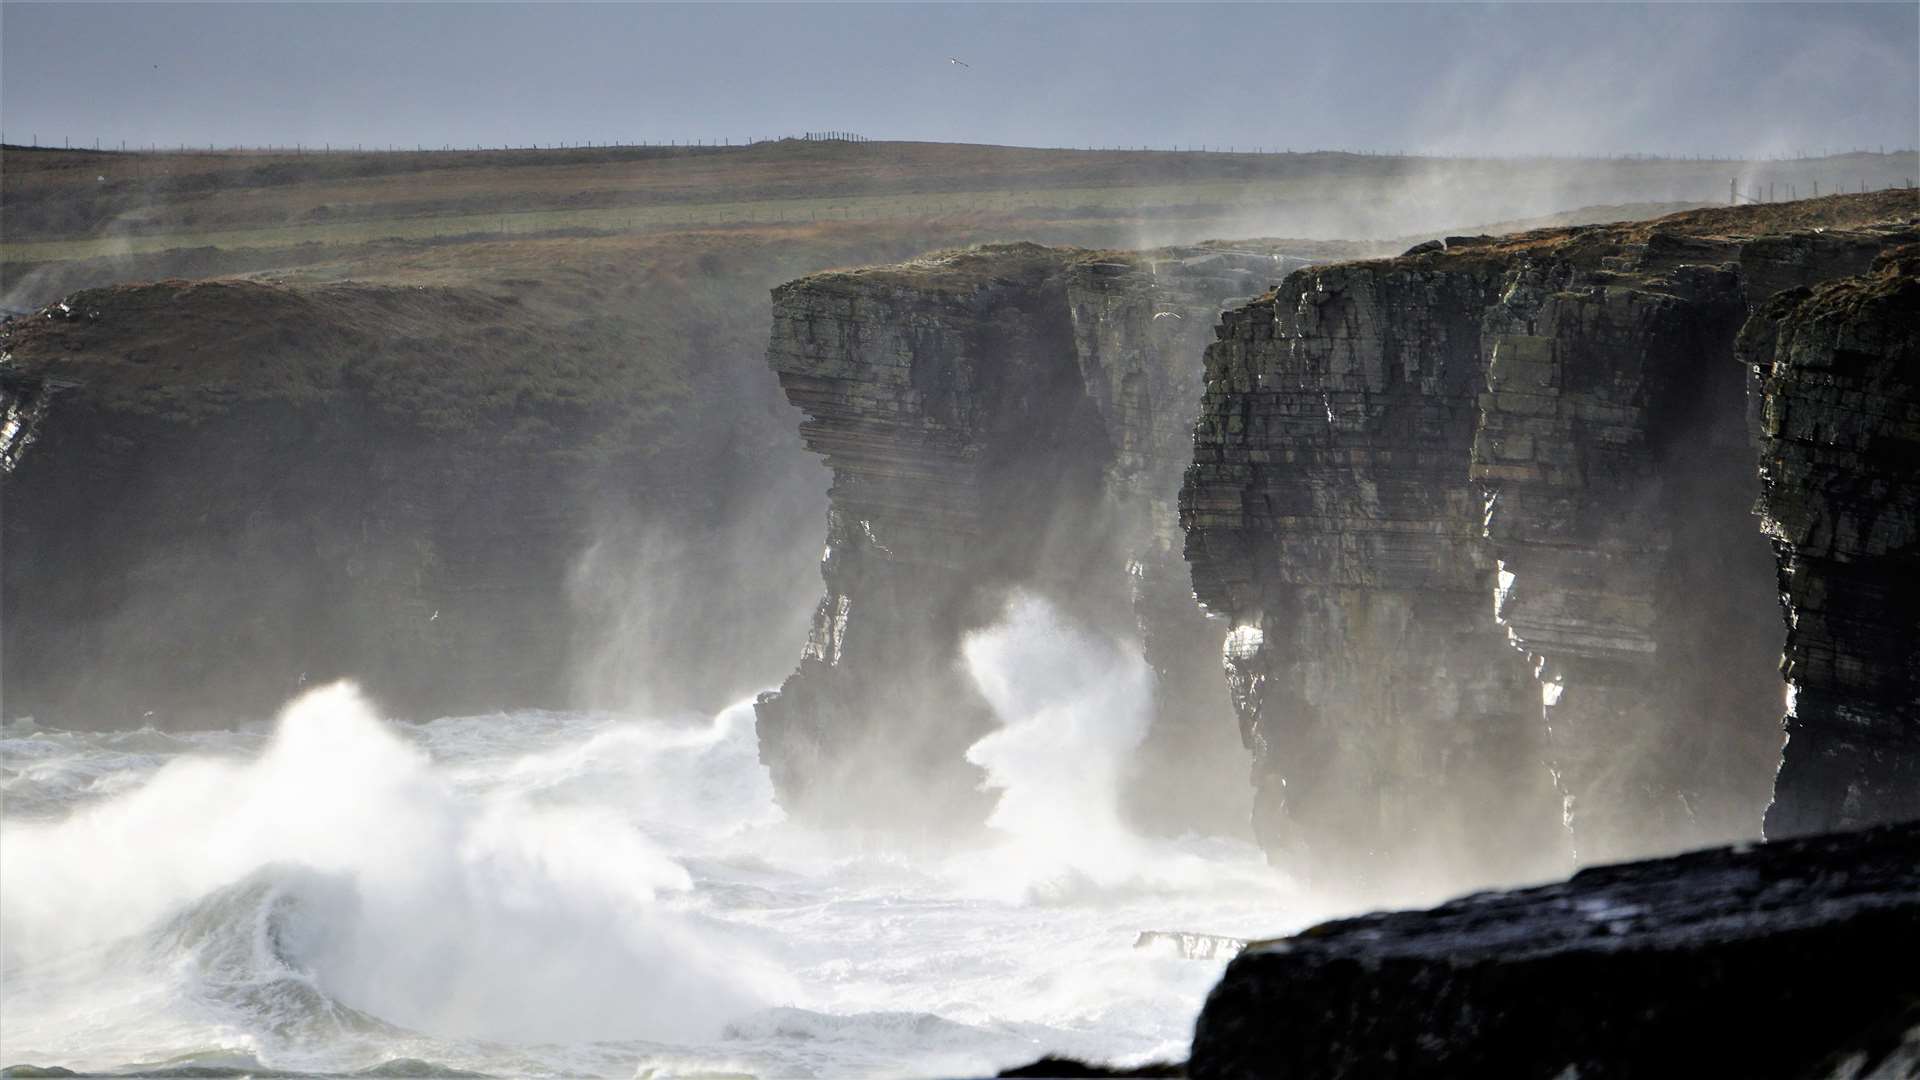 Could the sound be coming from waves pounding the Caithness coastline? Picture: DGS